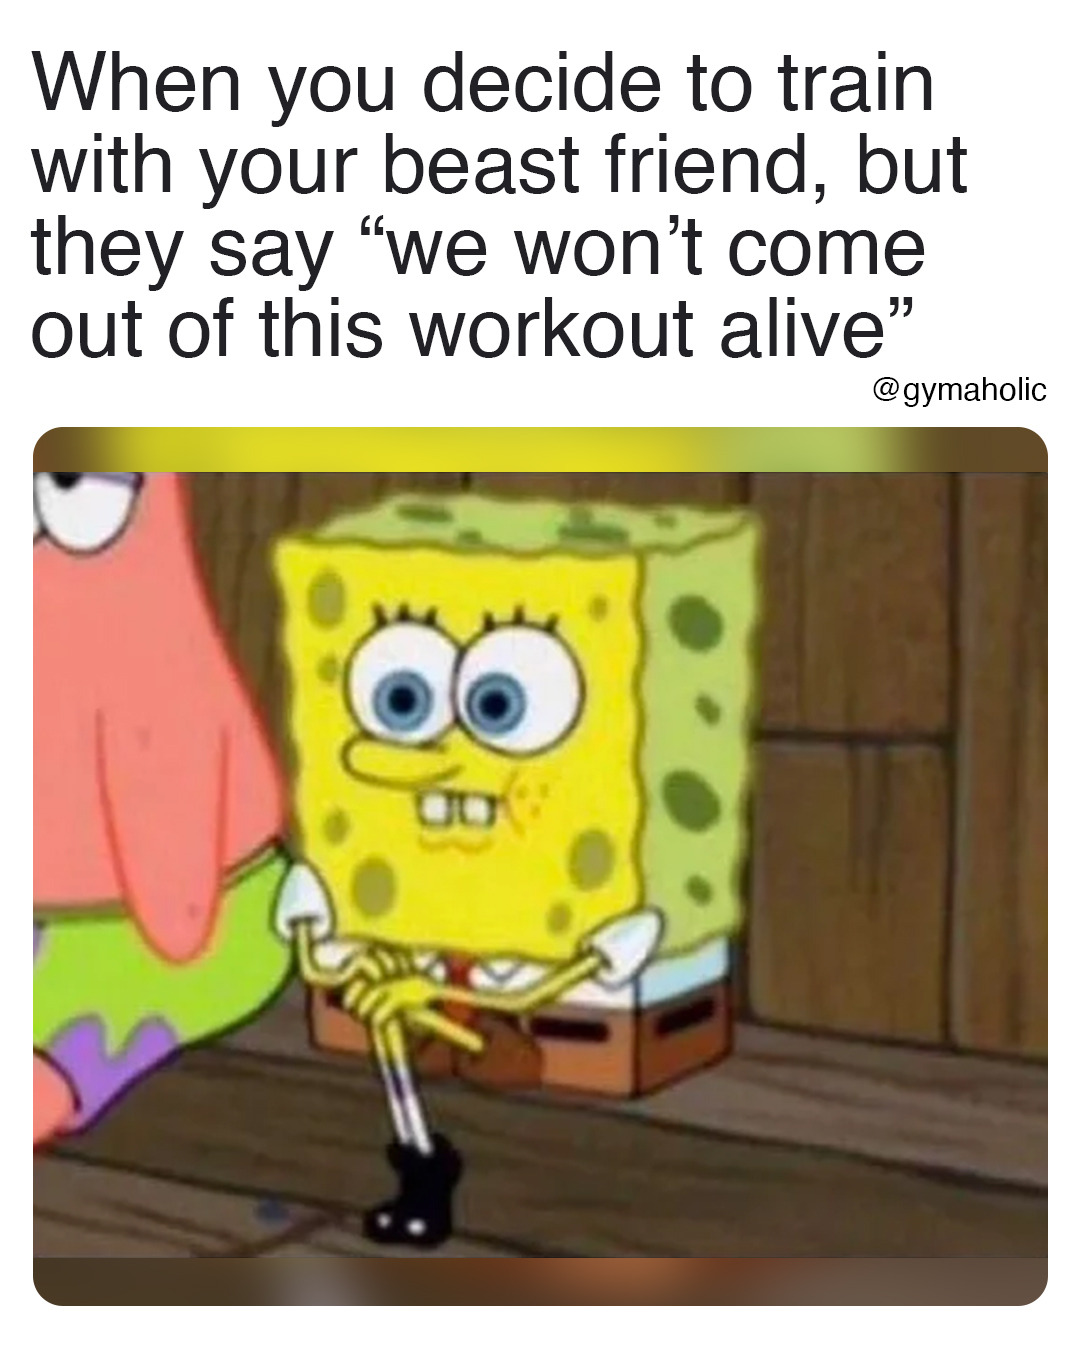 When you decide to train with your beast friend